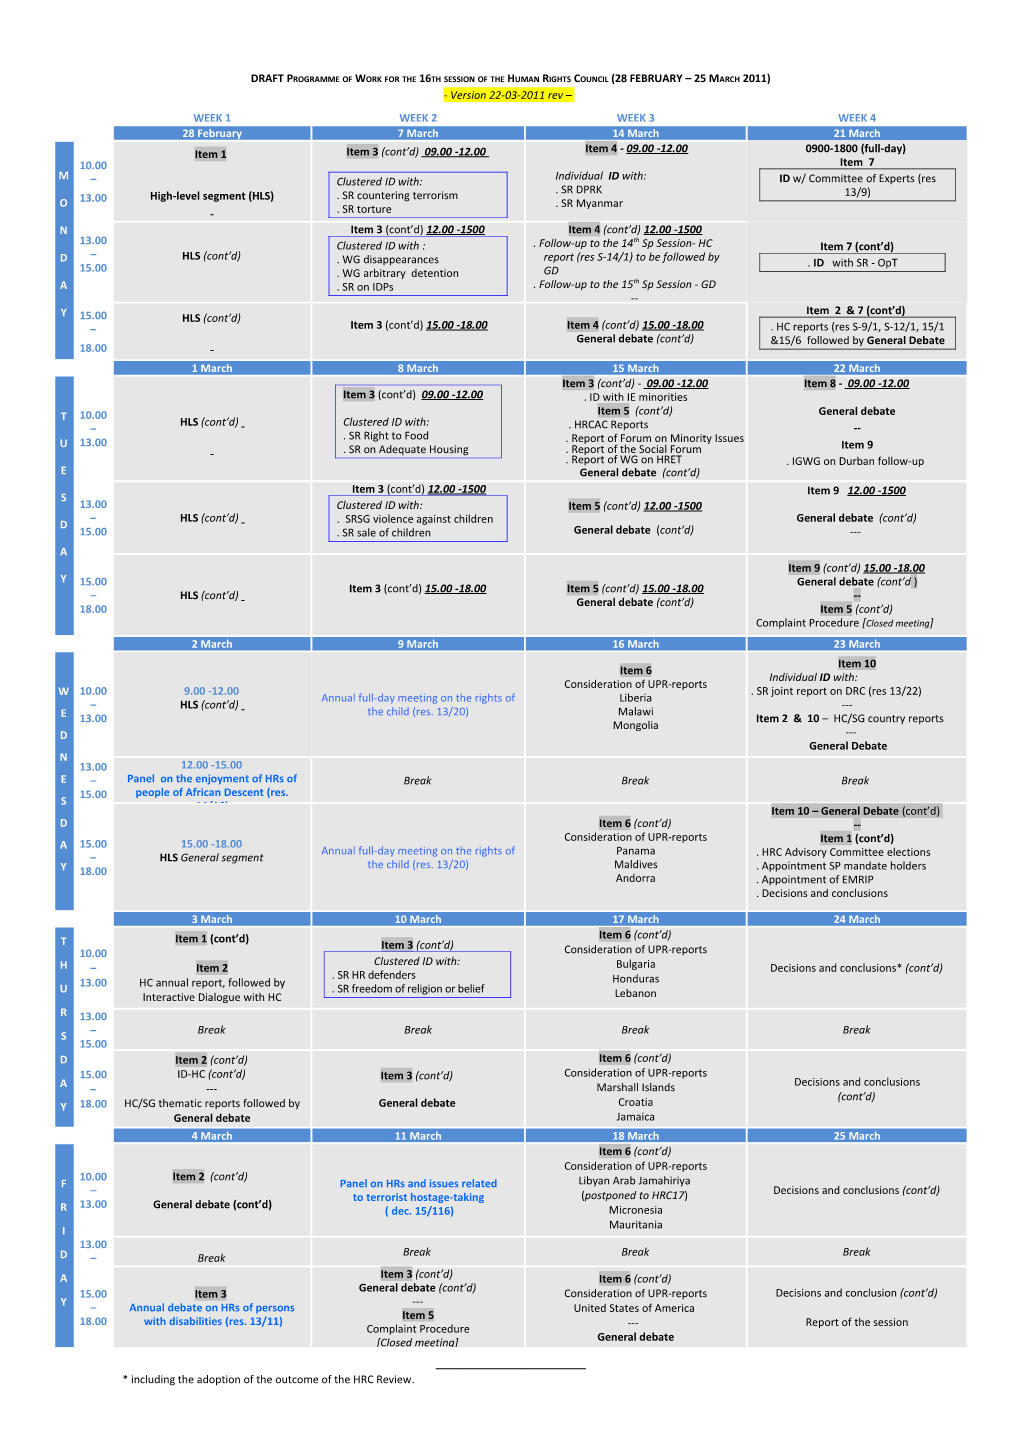 Programme of Work for the 13Th Session of the Human Rights Council (1 - 26 March 2010)